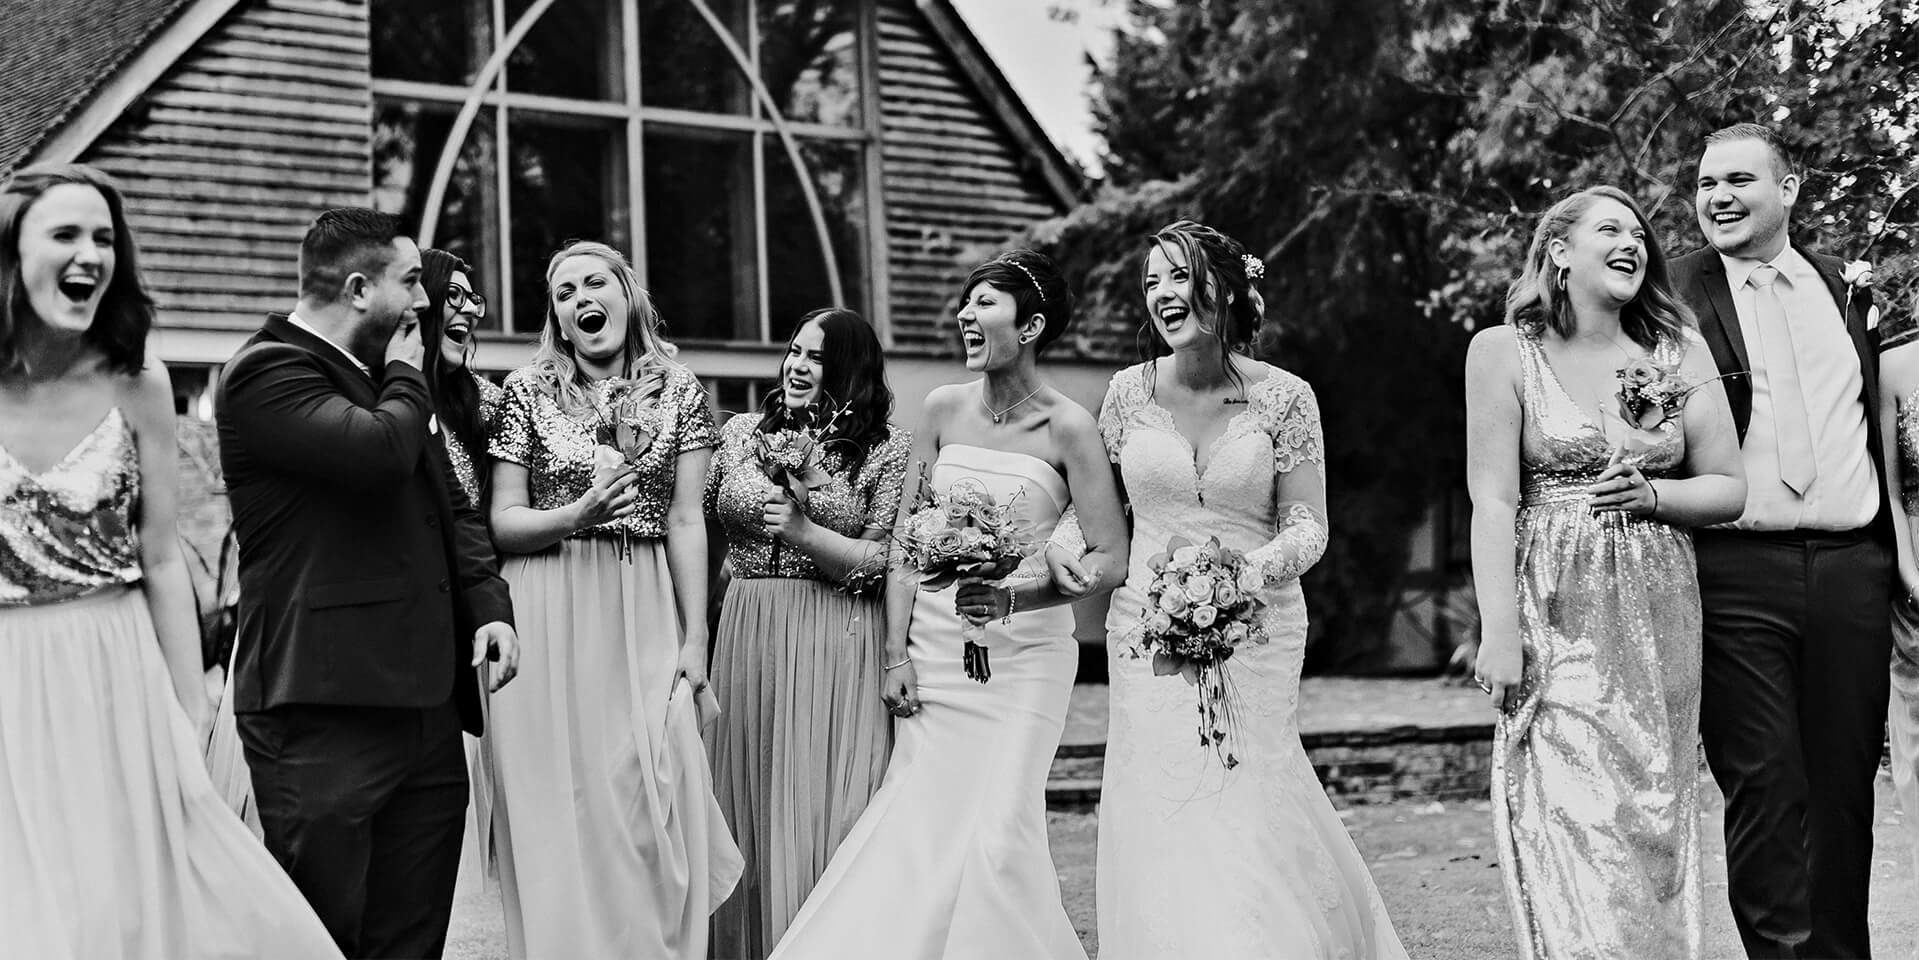 The wedding party joke around outside this stunning barn wedding venue in Hampshire